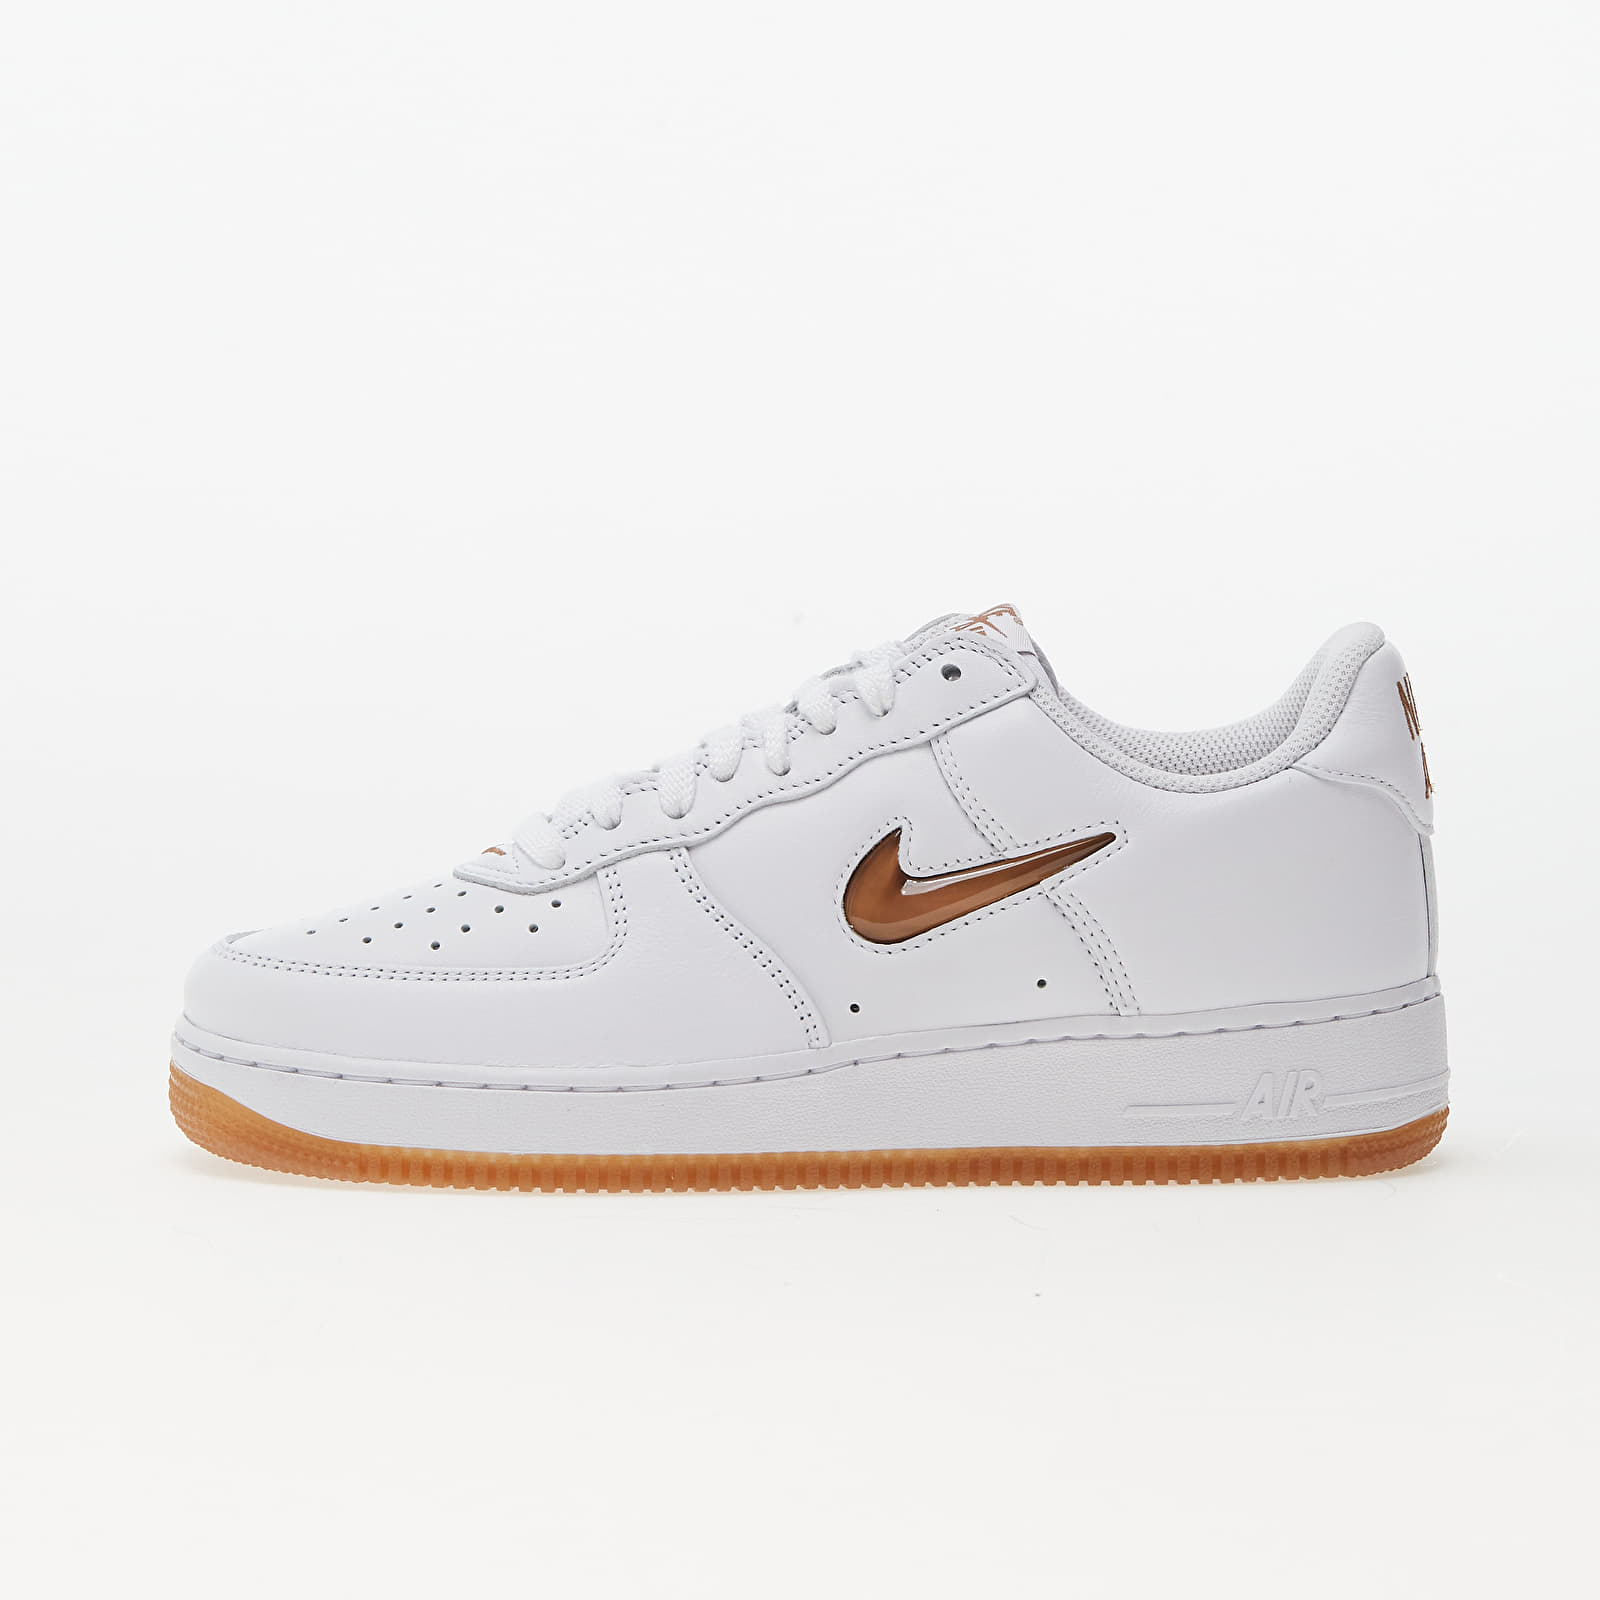 Levně Nike Air Force 1 Low Retro White/ Gum Med Brown